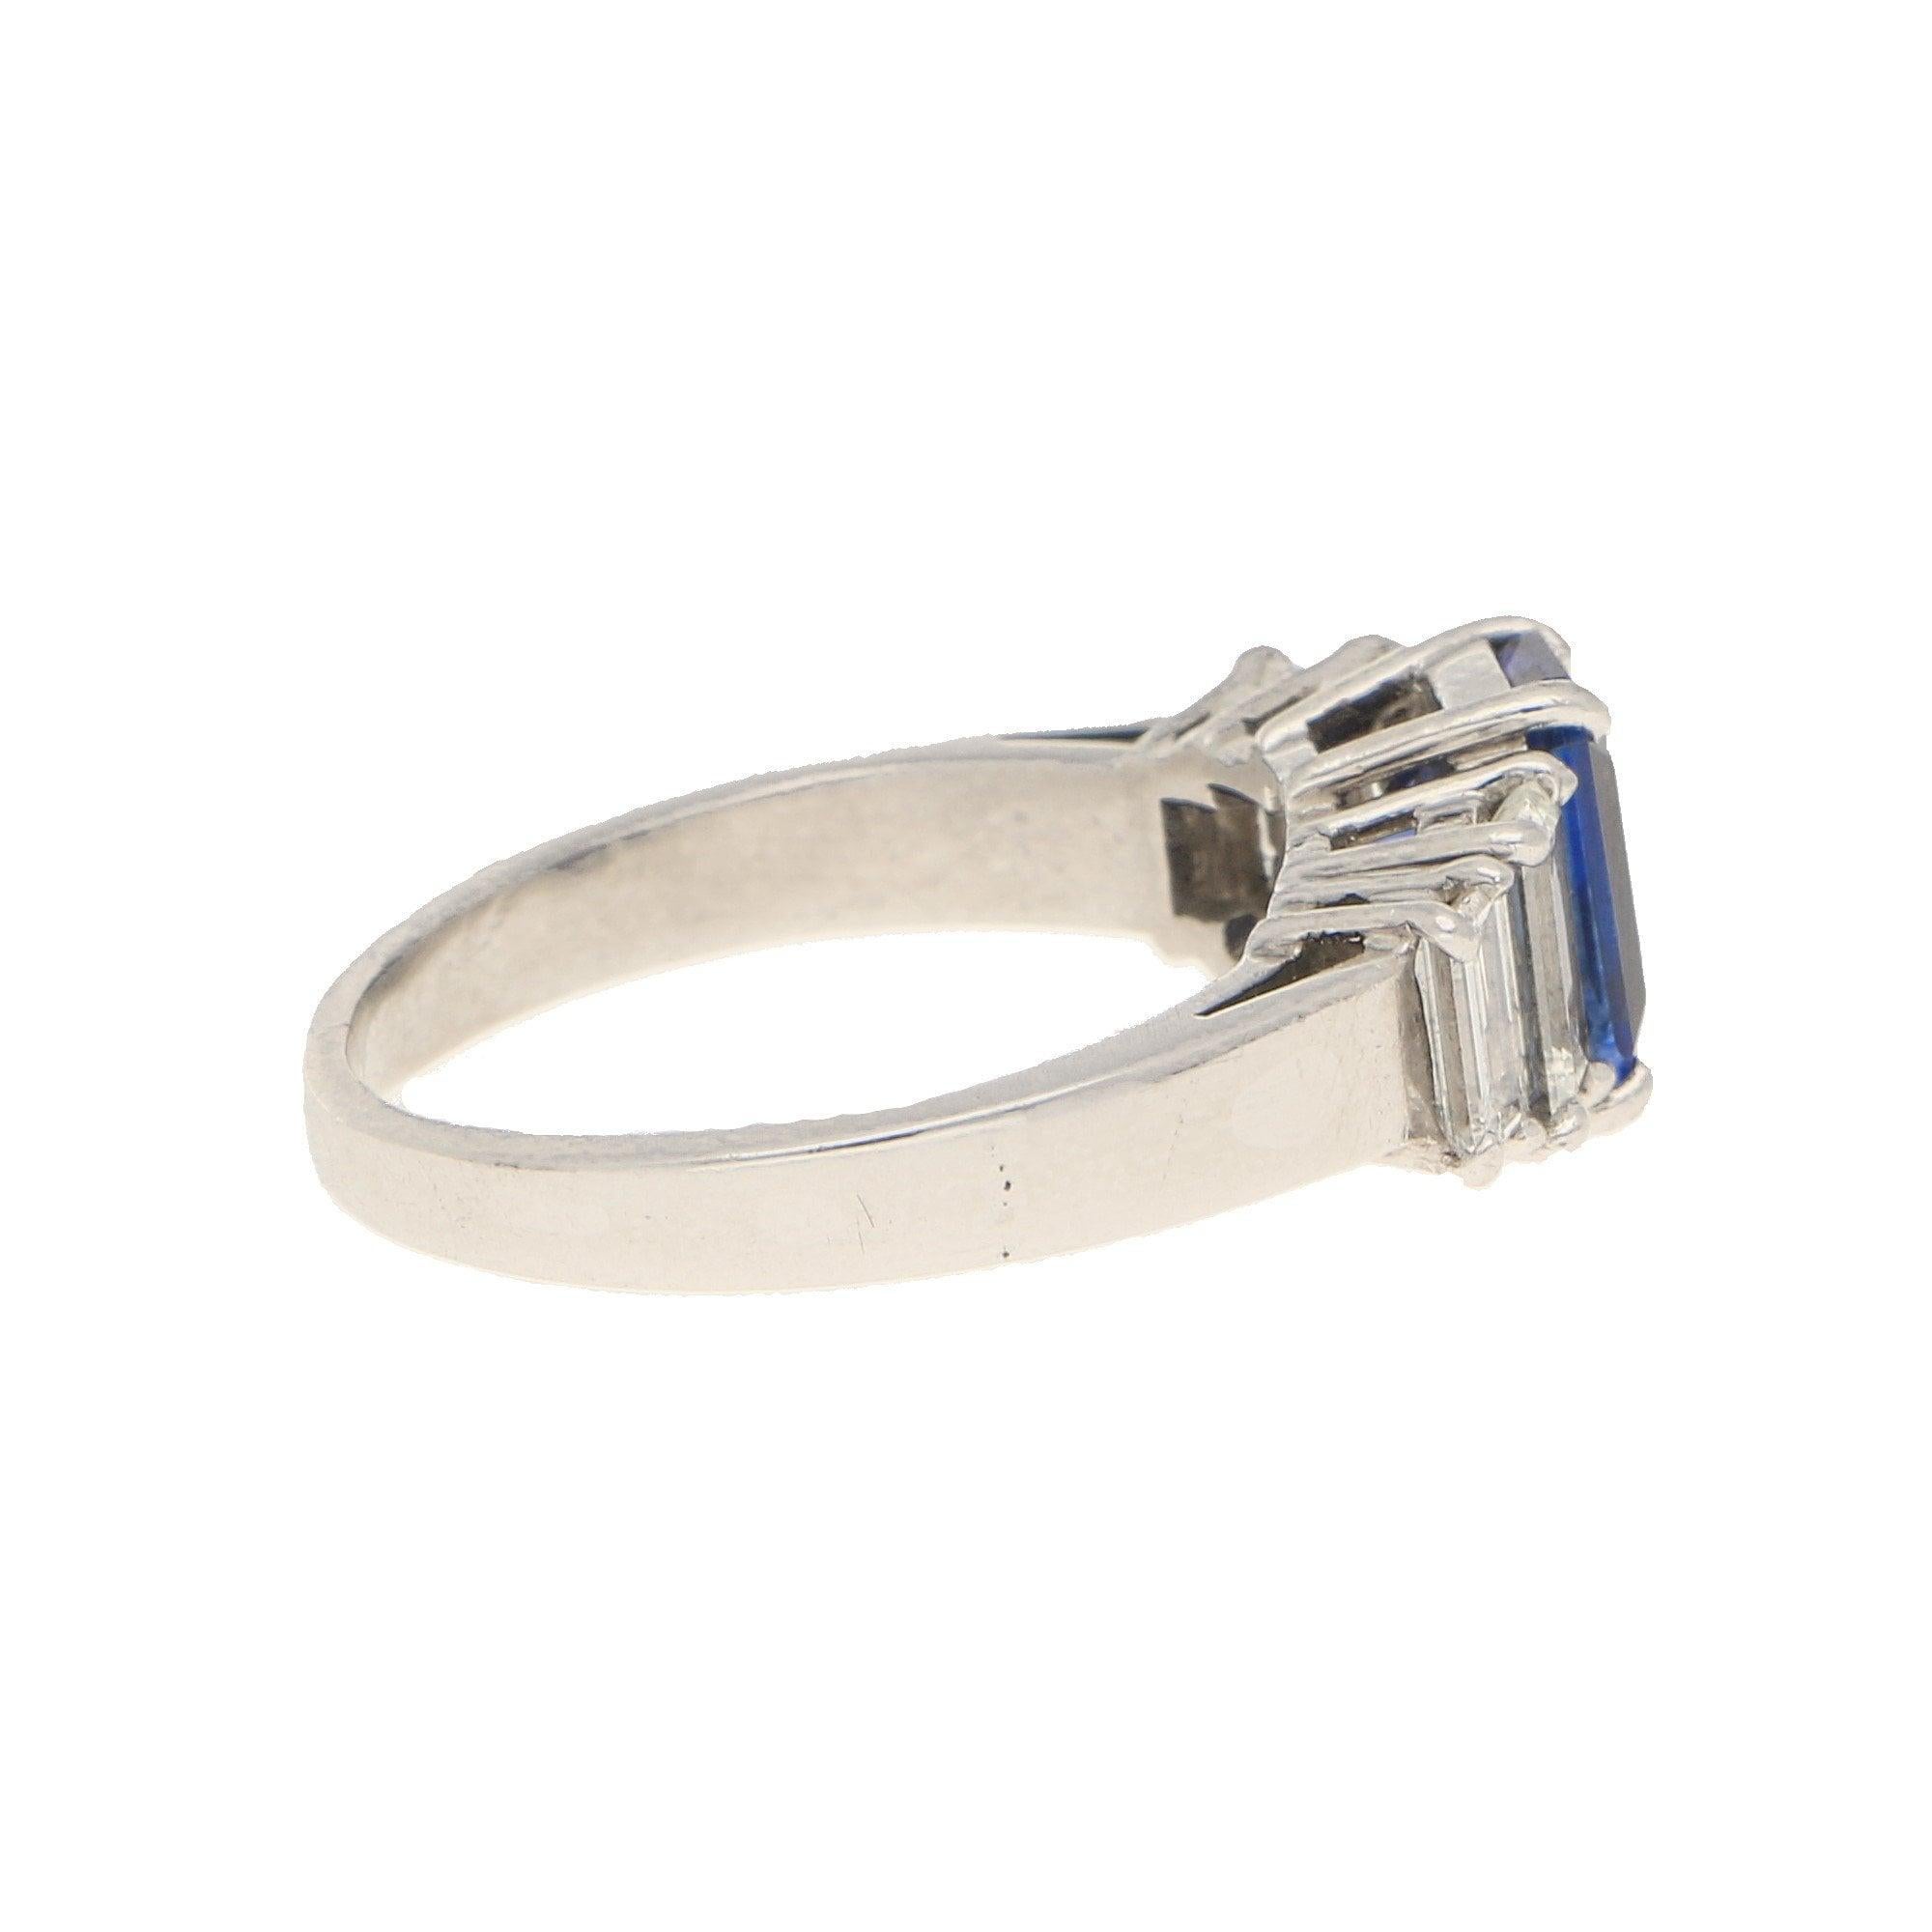 An elegant sapphire and diamond five stone ring set in platinum. 

This beautiful piece centrally features an emerald cut sapphire of vibrant royal blue colouring. This sapphire is securely four claw set to centre and is flanked to each side by two